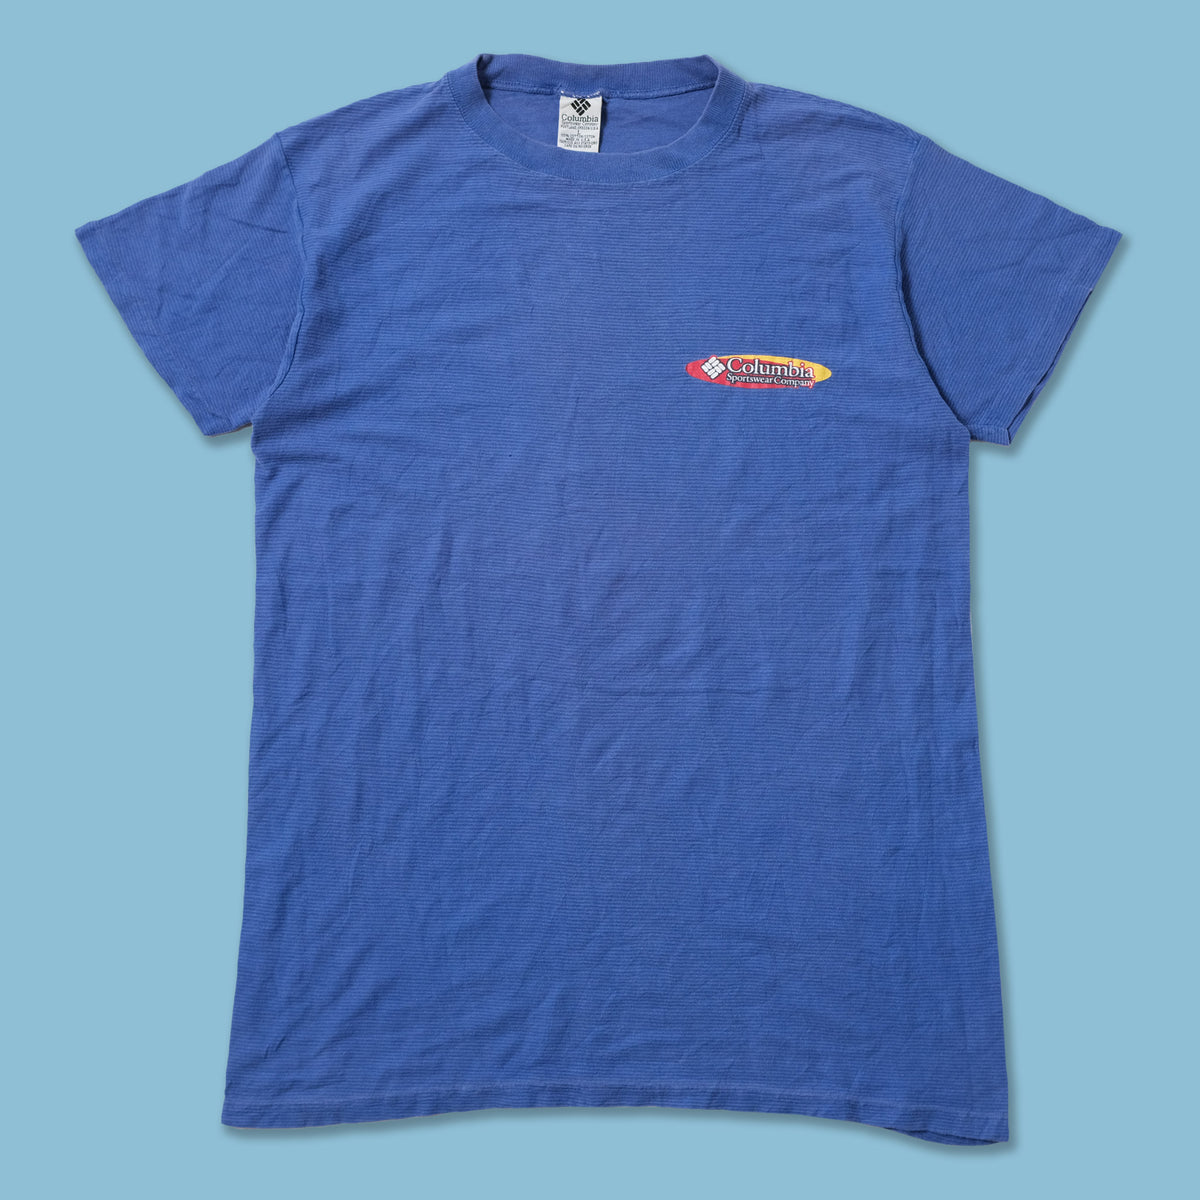 Columbia T-Shirt - XL – The Vintage Store